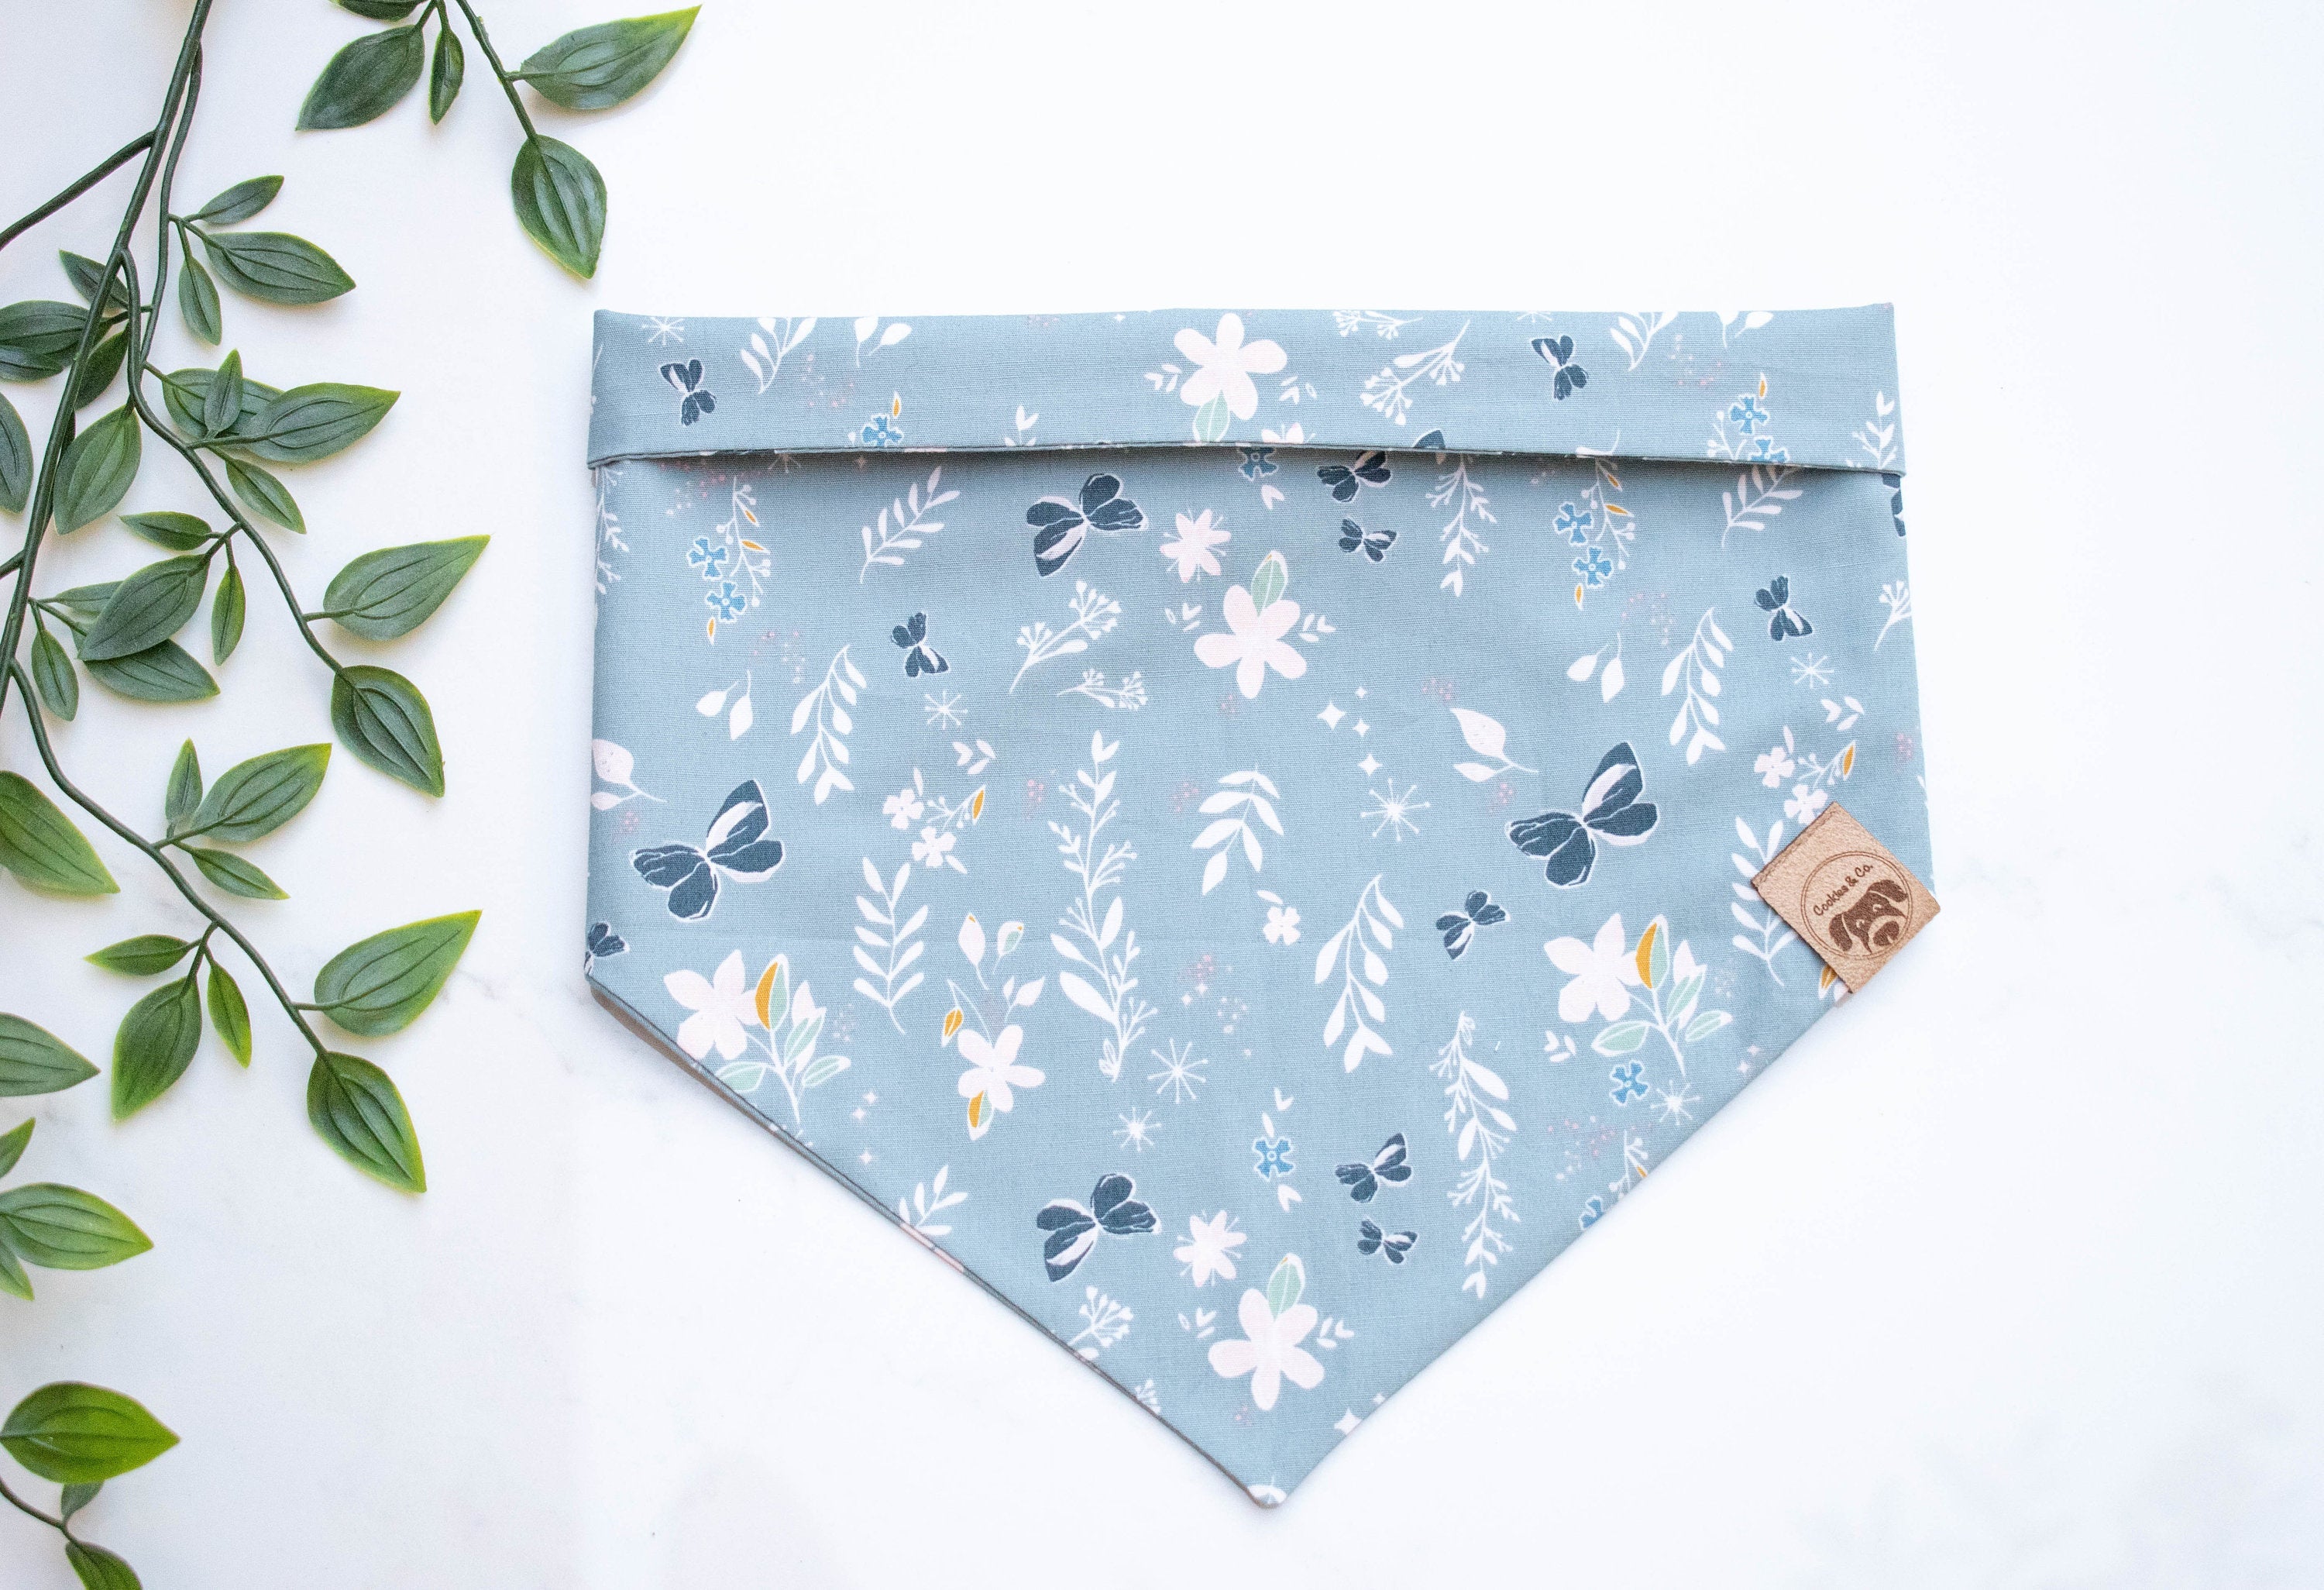 Flower Fields bandana print, featuring dark blue butterflies and white flowers and ferns on a light turquoise fabric